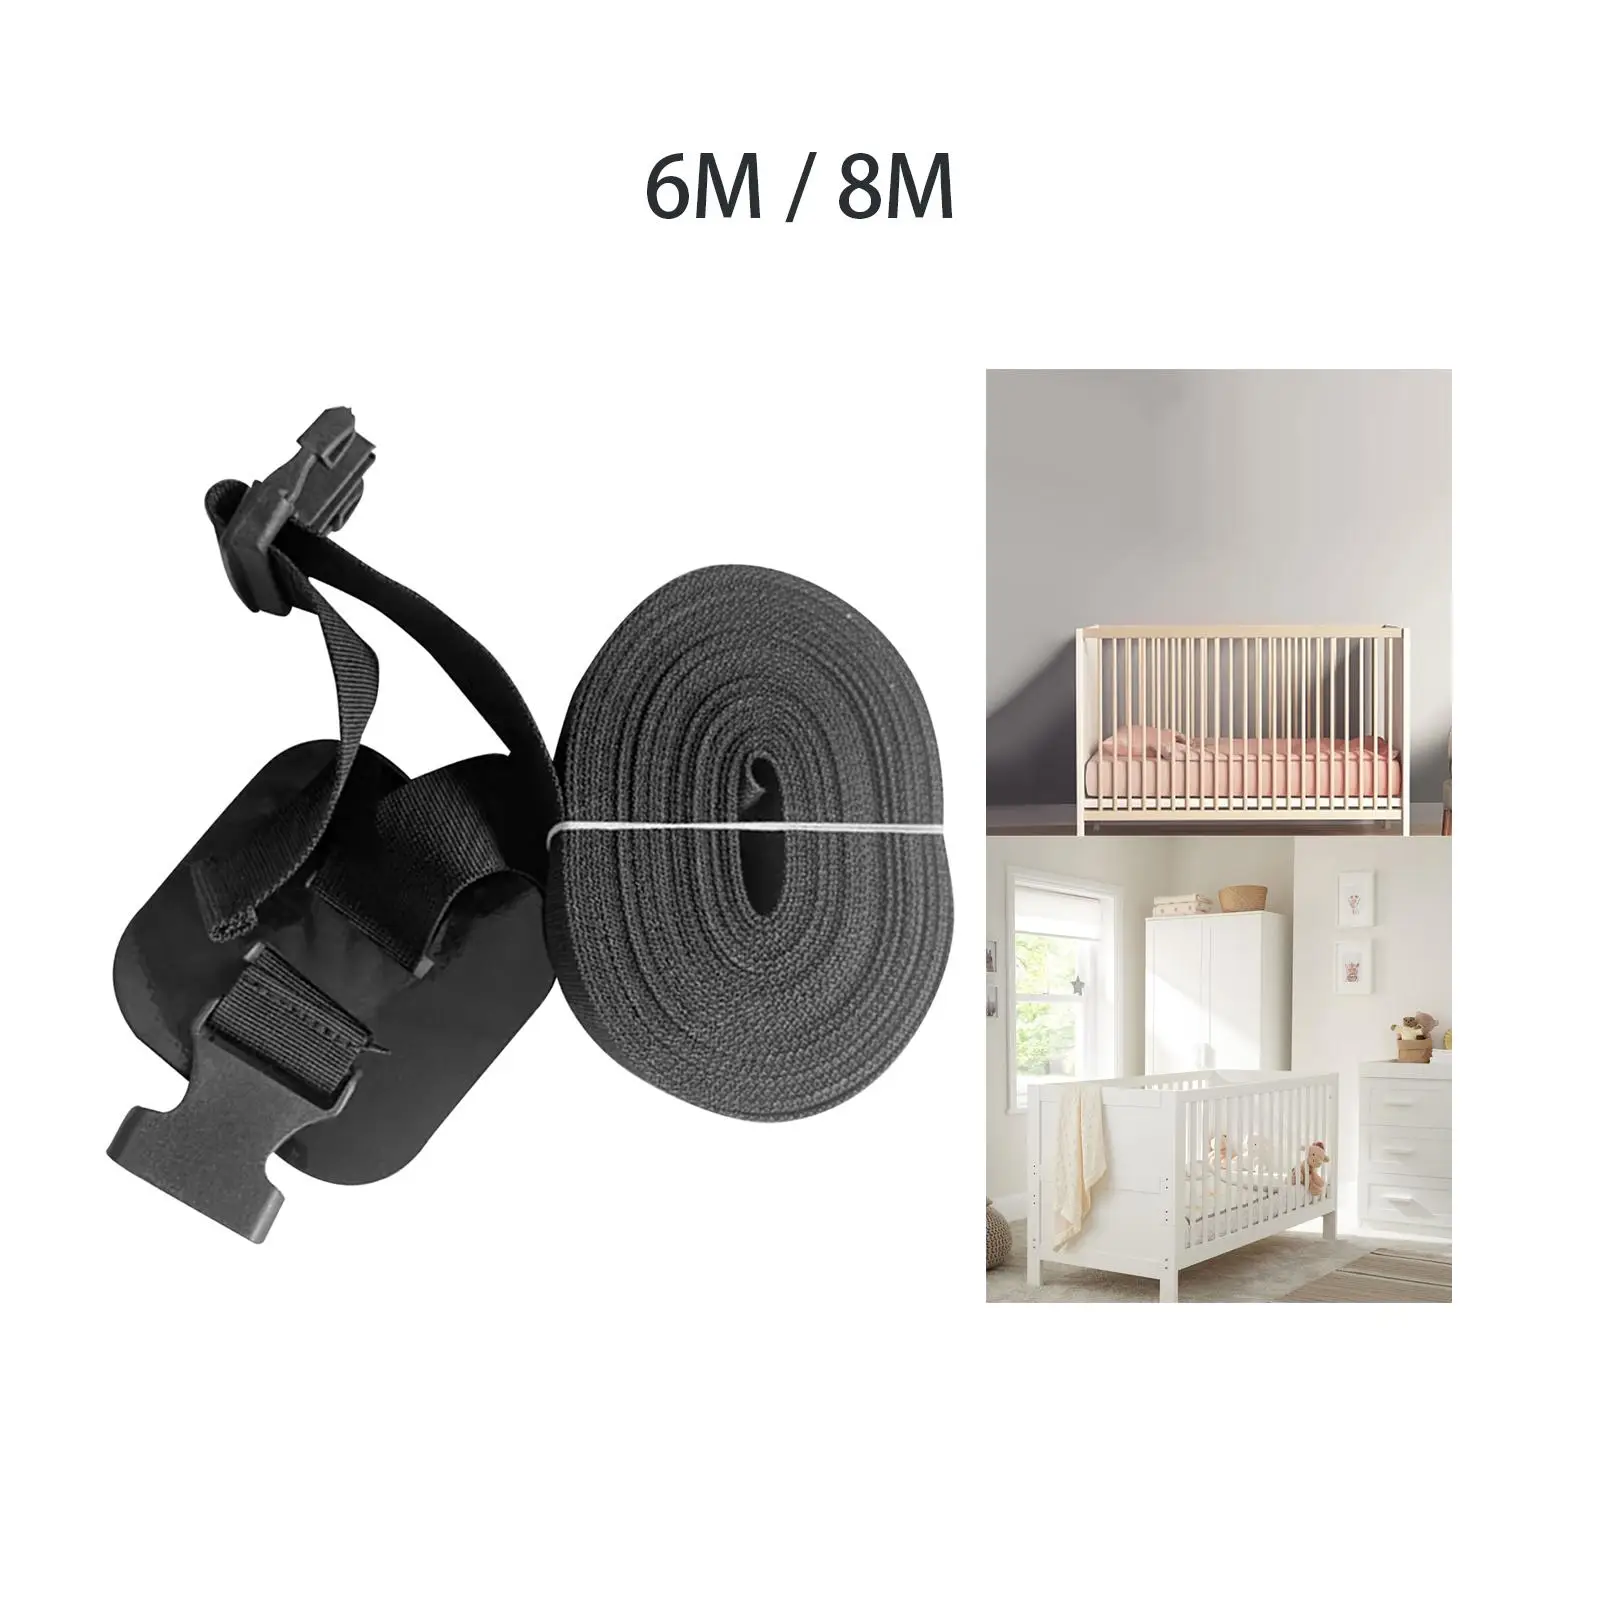 Attachment Bed Strap with Adjustable Buckle Mattress Bed Attachment Long Bed Connector Strap for Cots and Box Spring Beds